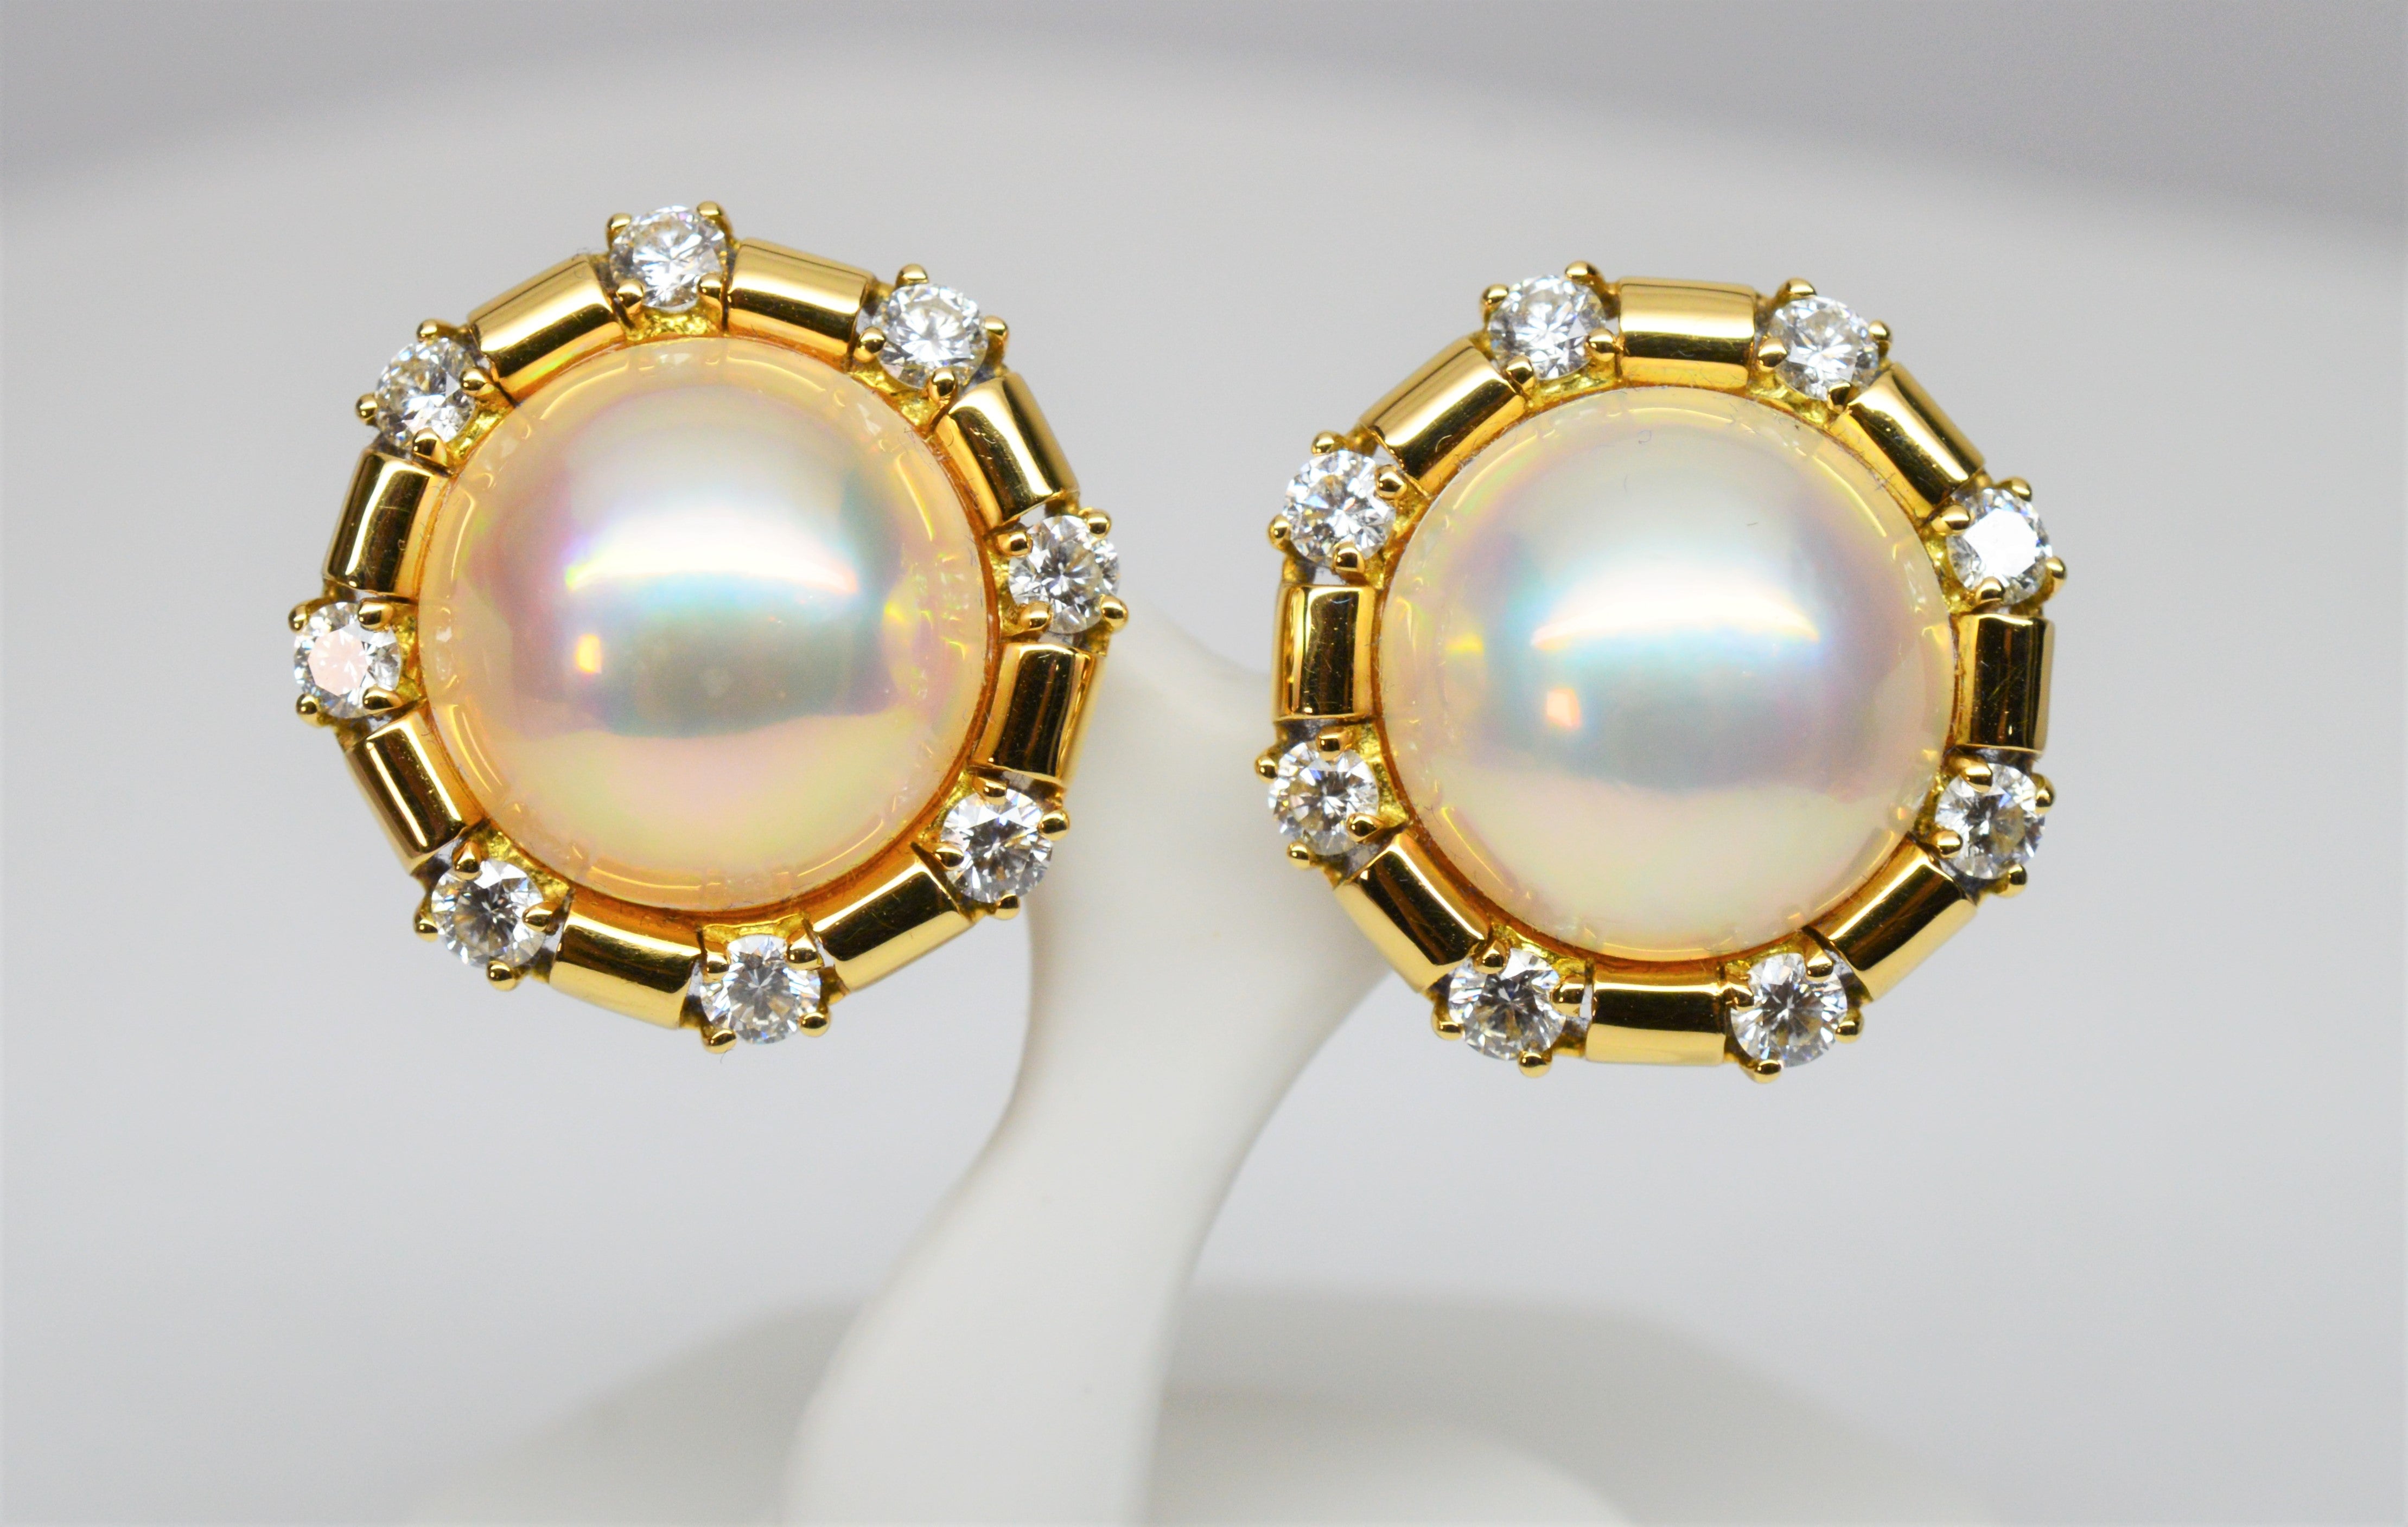 Offered at a very special price: From the exclusive Charles Turi Collection, these eighteen karat 18K yellow gold, diamond and mabe pearl earrings create a truly distinctive and elegant look. Round in shape, each measuring approximately 20mm with